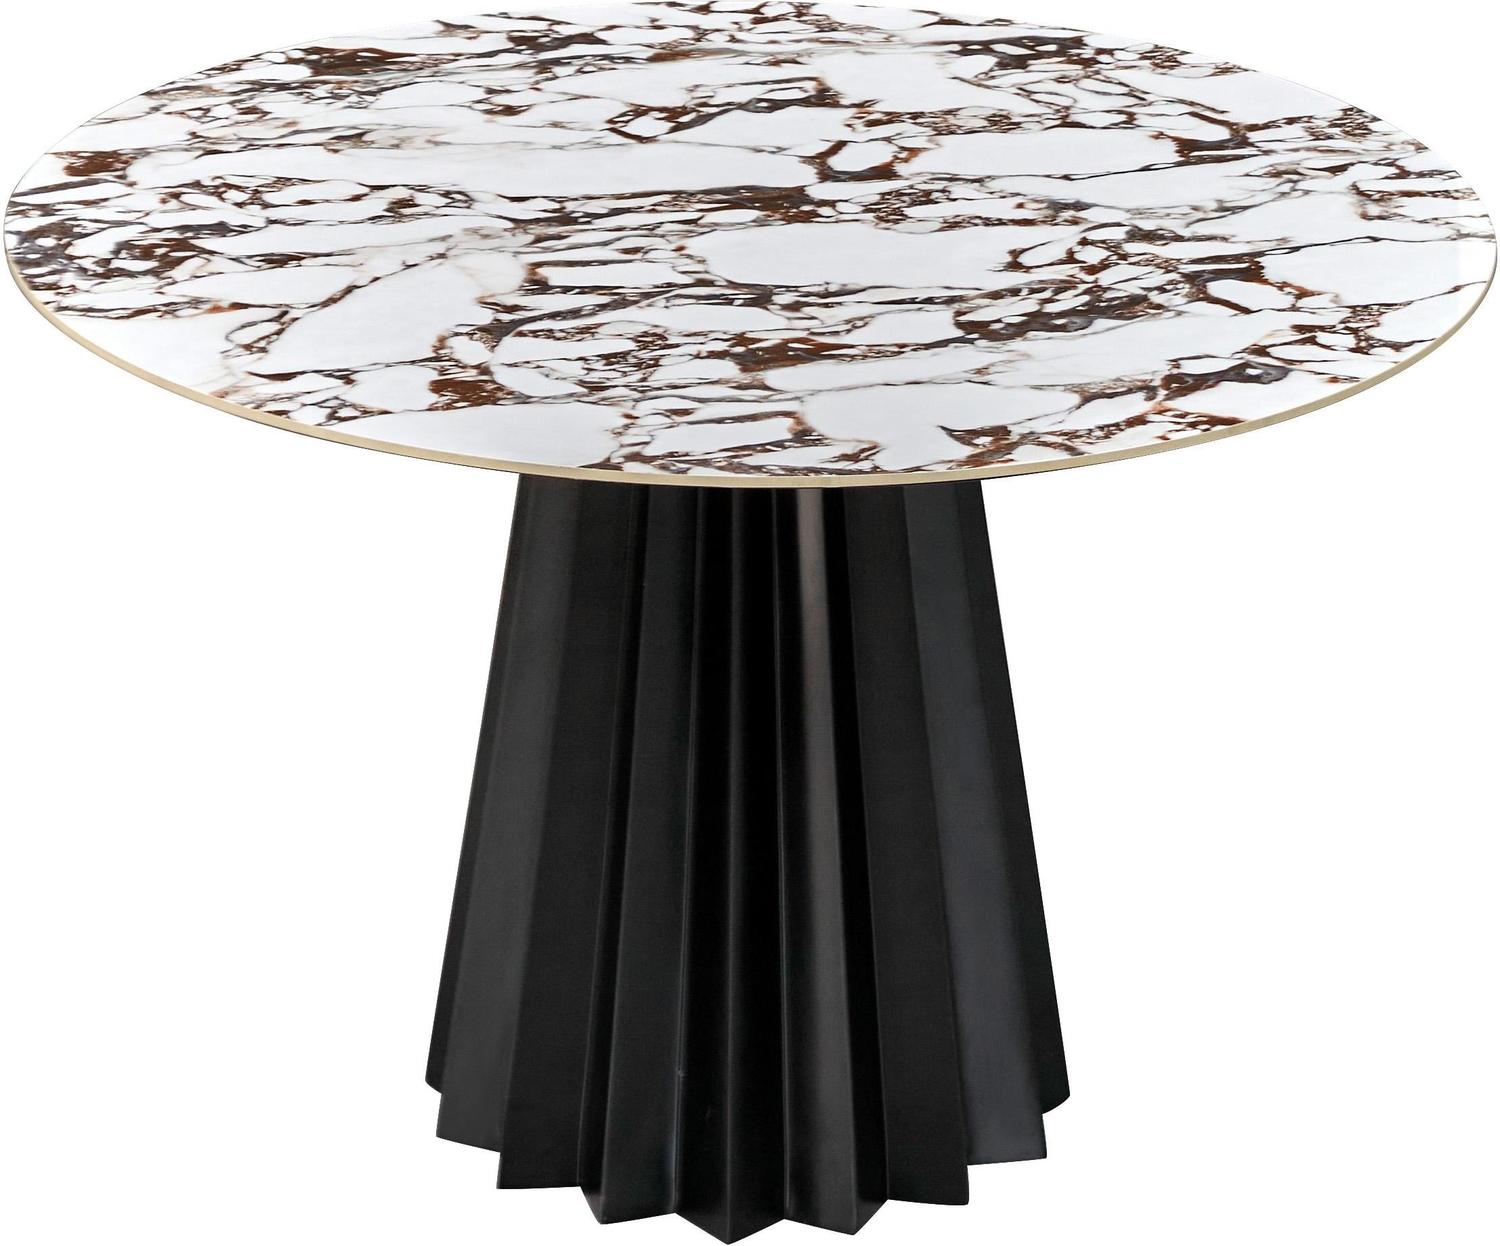 white dining room table set Tov Furniture Dining Tables Black,White Marble